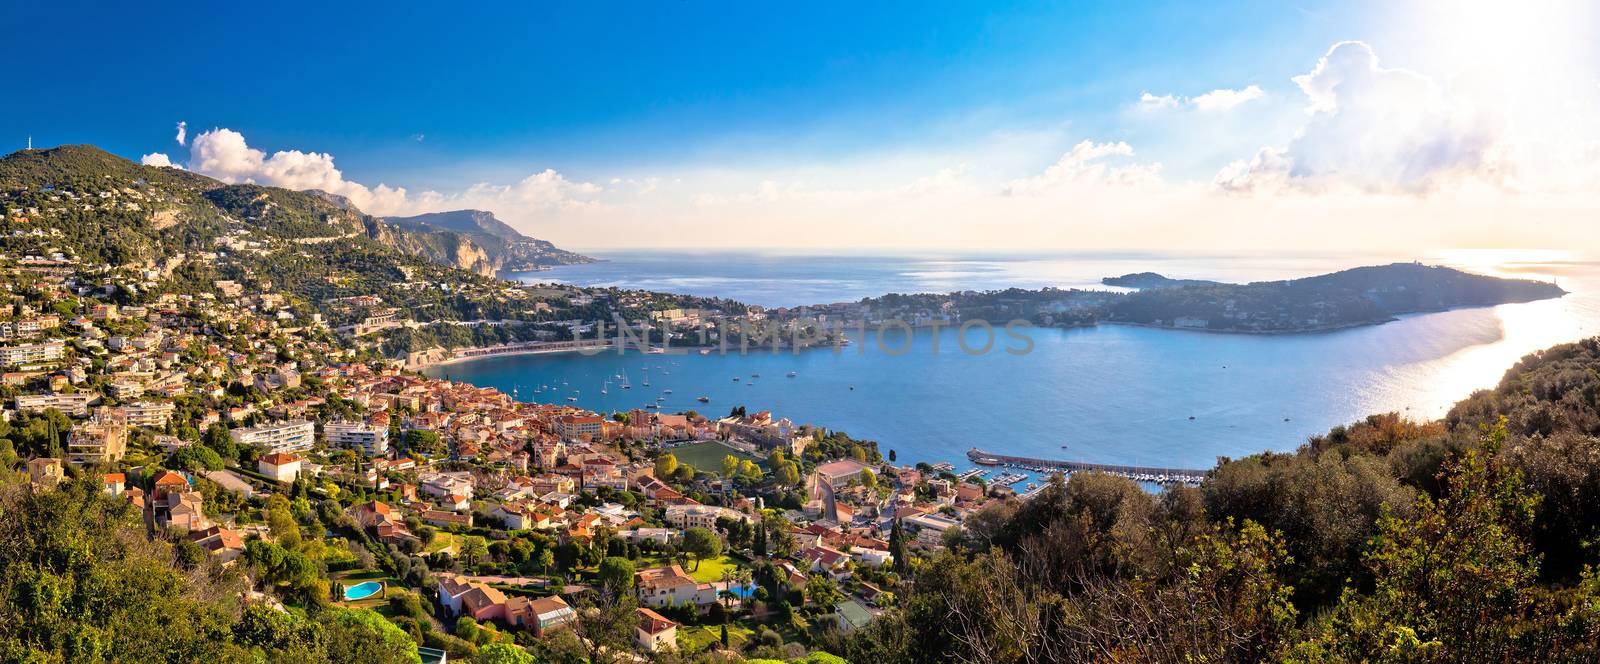 Villefranche sur Mer and Cap Ferrat on French riviera coastline panoramic view, Alpes-Maritimes region of France